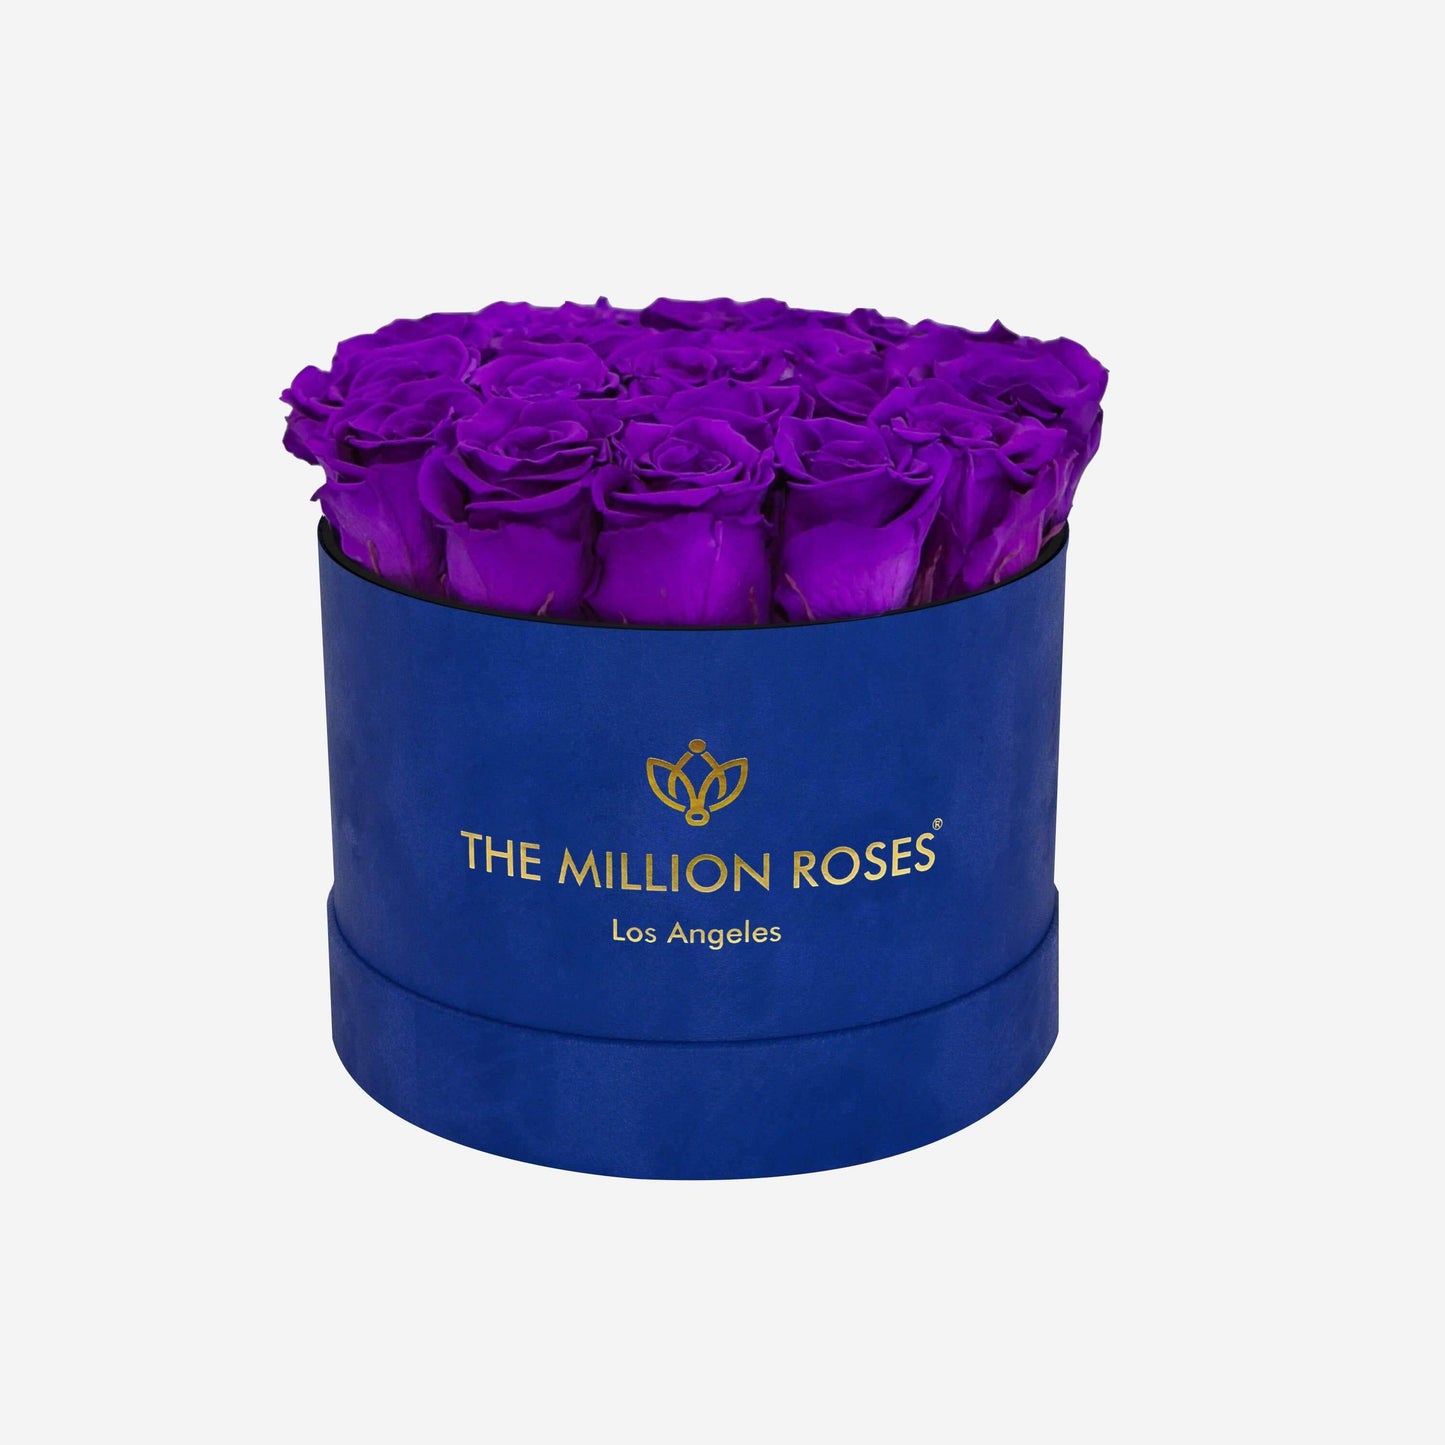 Classic Royal Blue Suede Box | Bright Purple Roses - The Million Roses